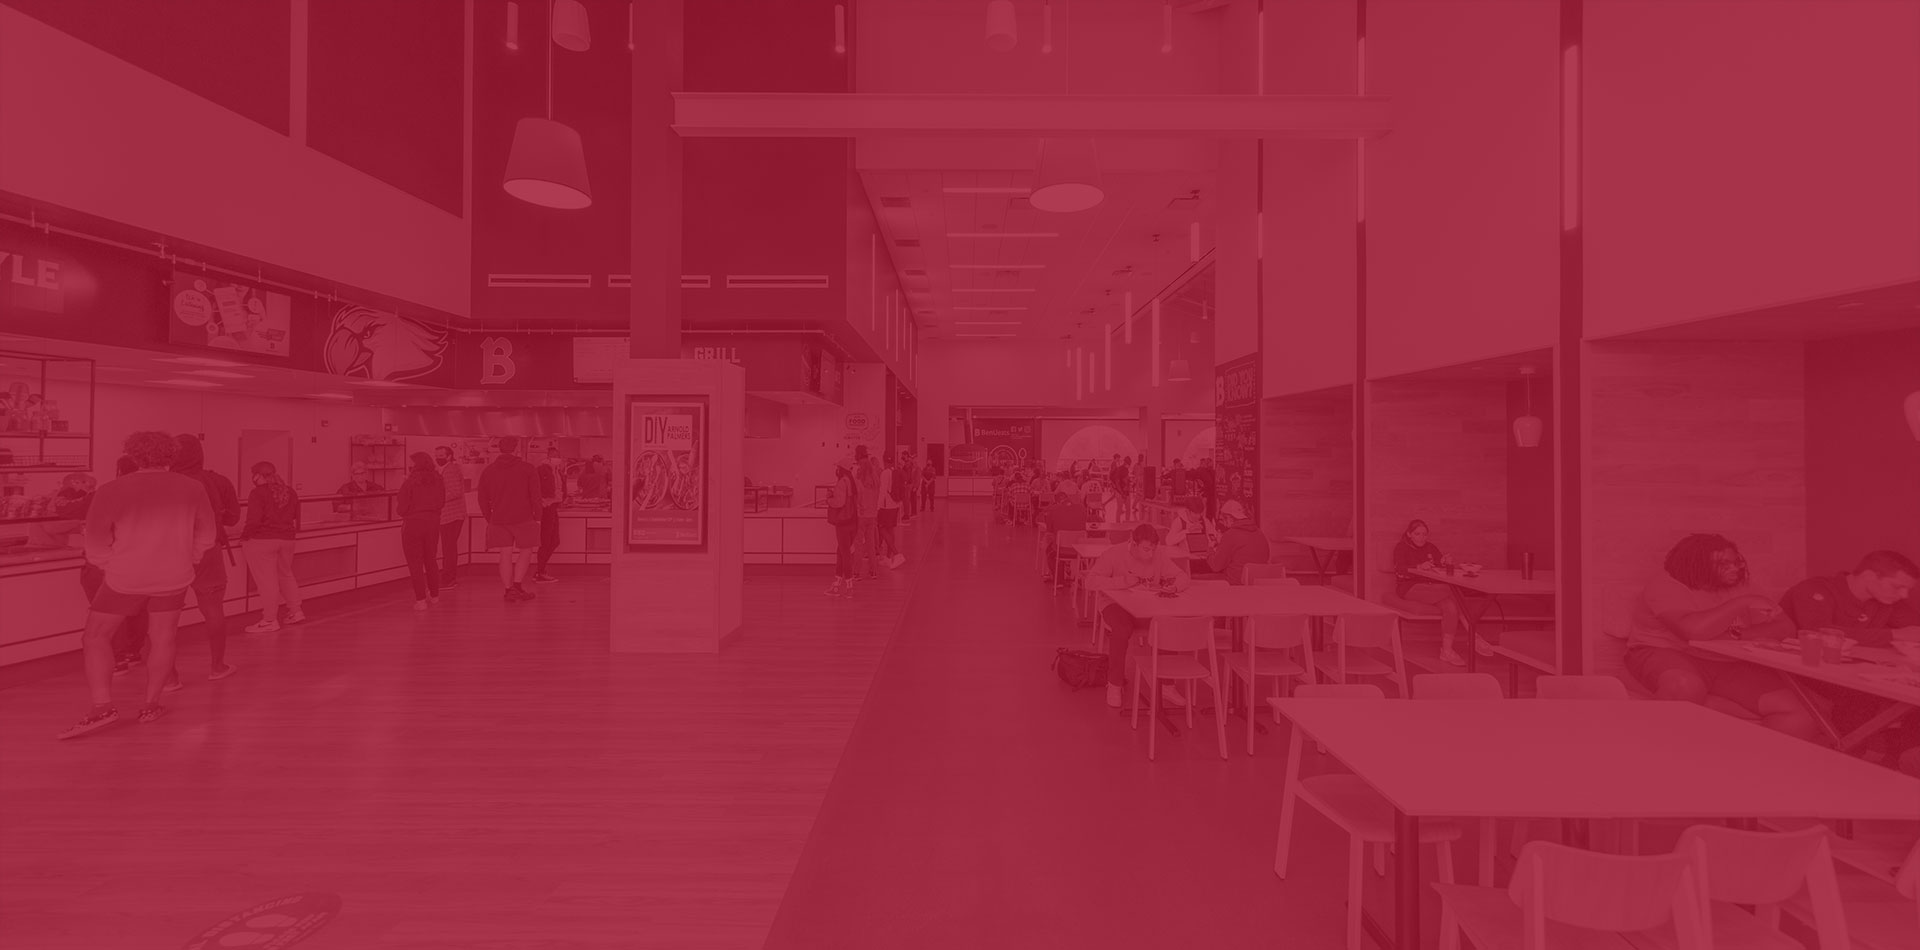 Dining Services - red overlay over a photo of the new Benny's cafeteria